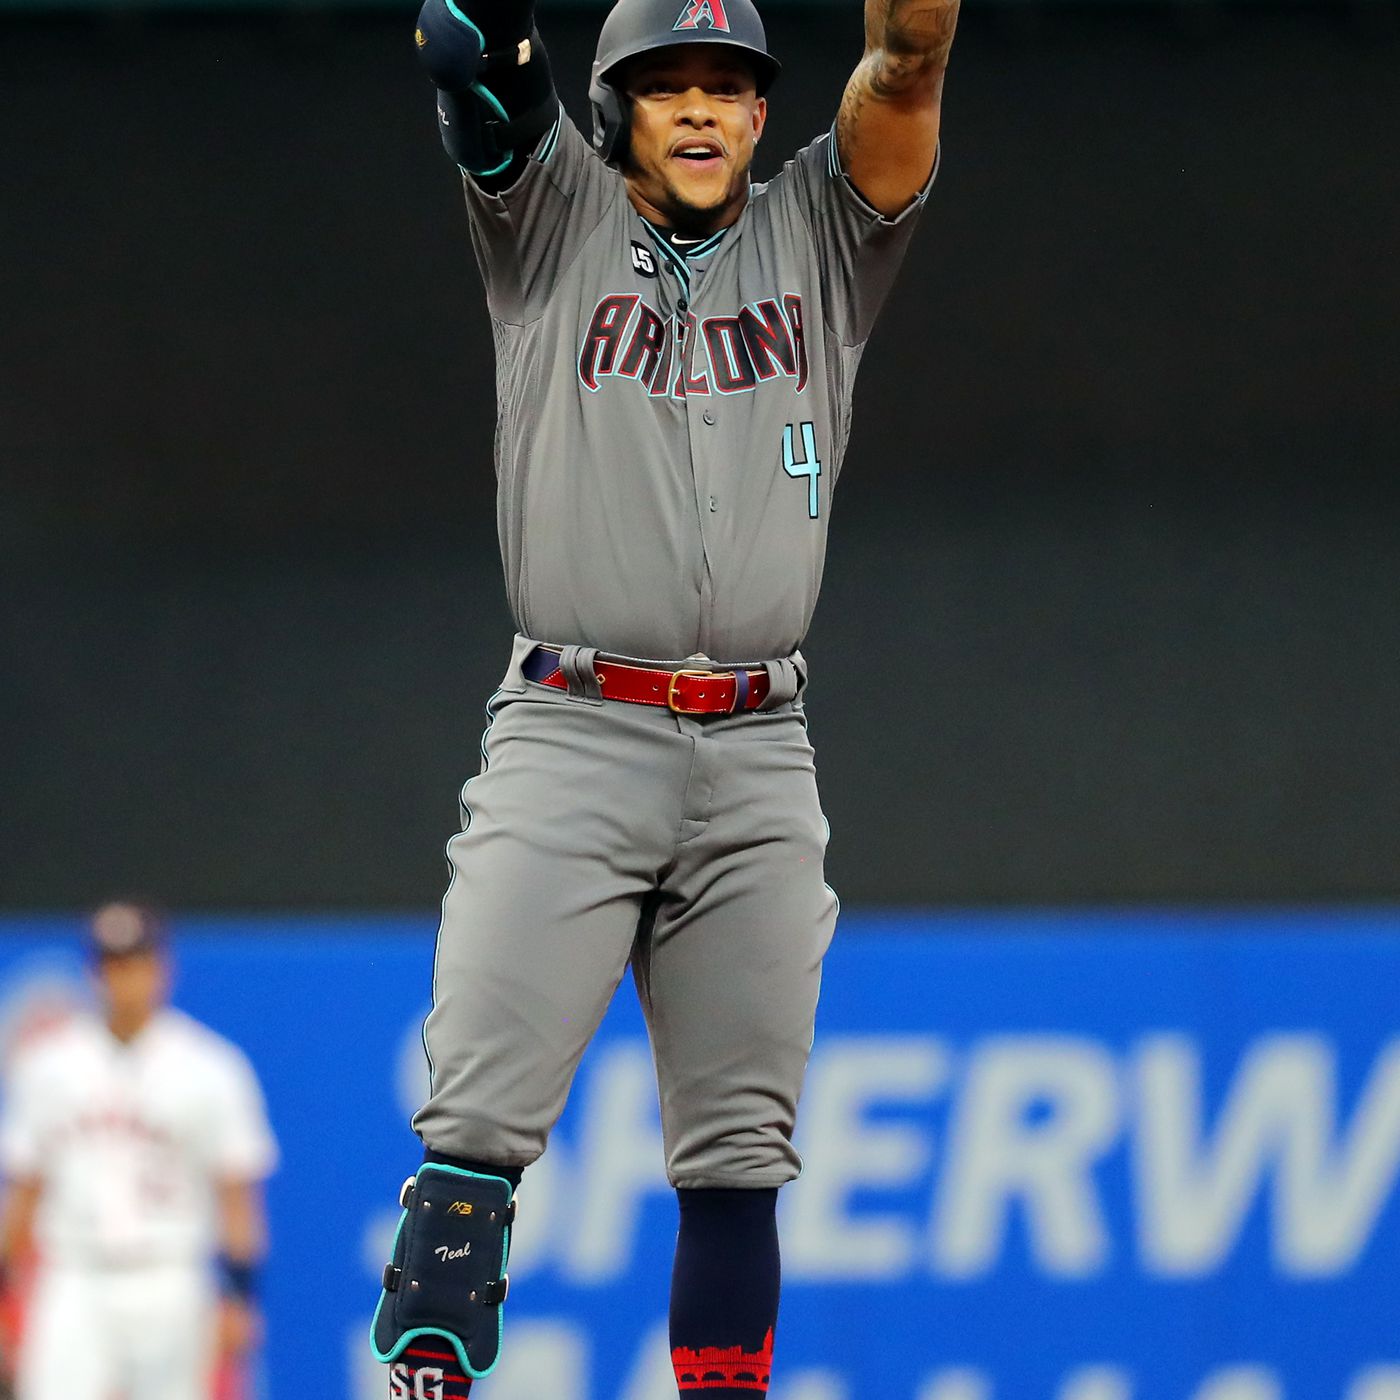 NL 3, AL 4: Ketel Marte goes 1-for-2 in Cleveland, Kershaw and Co